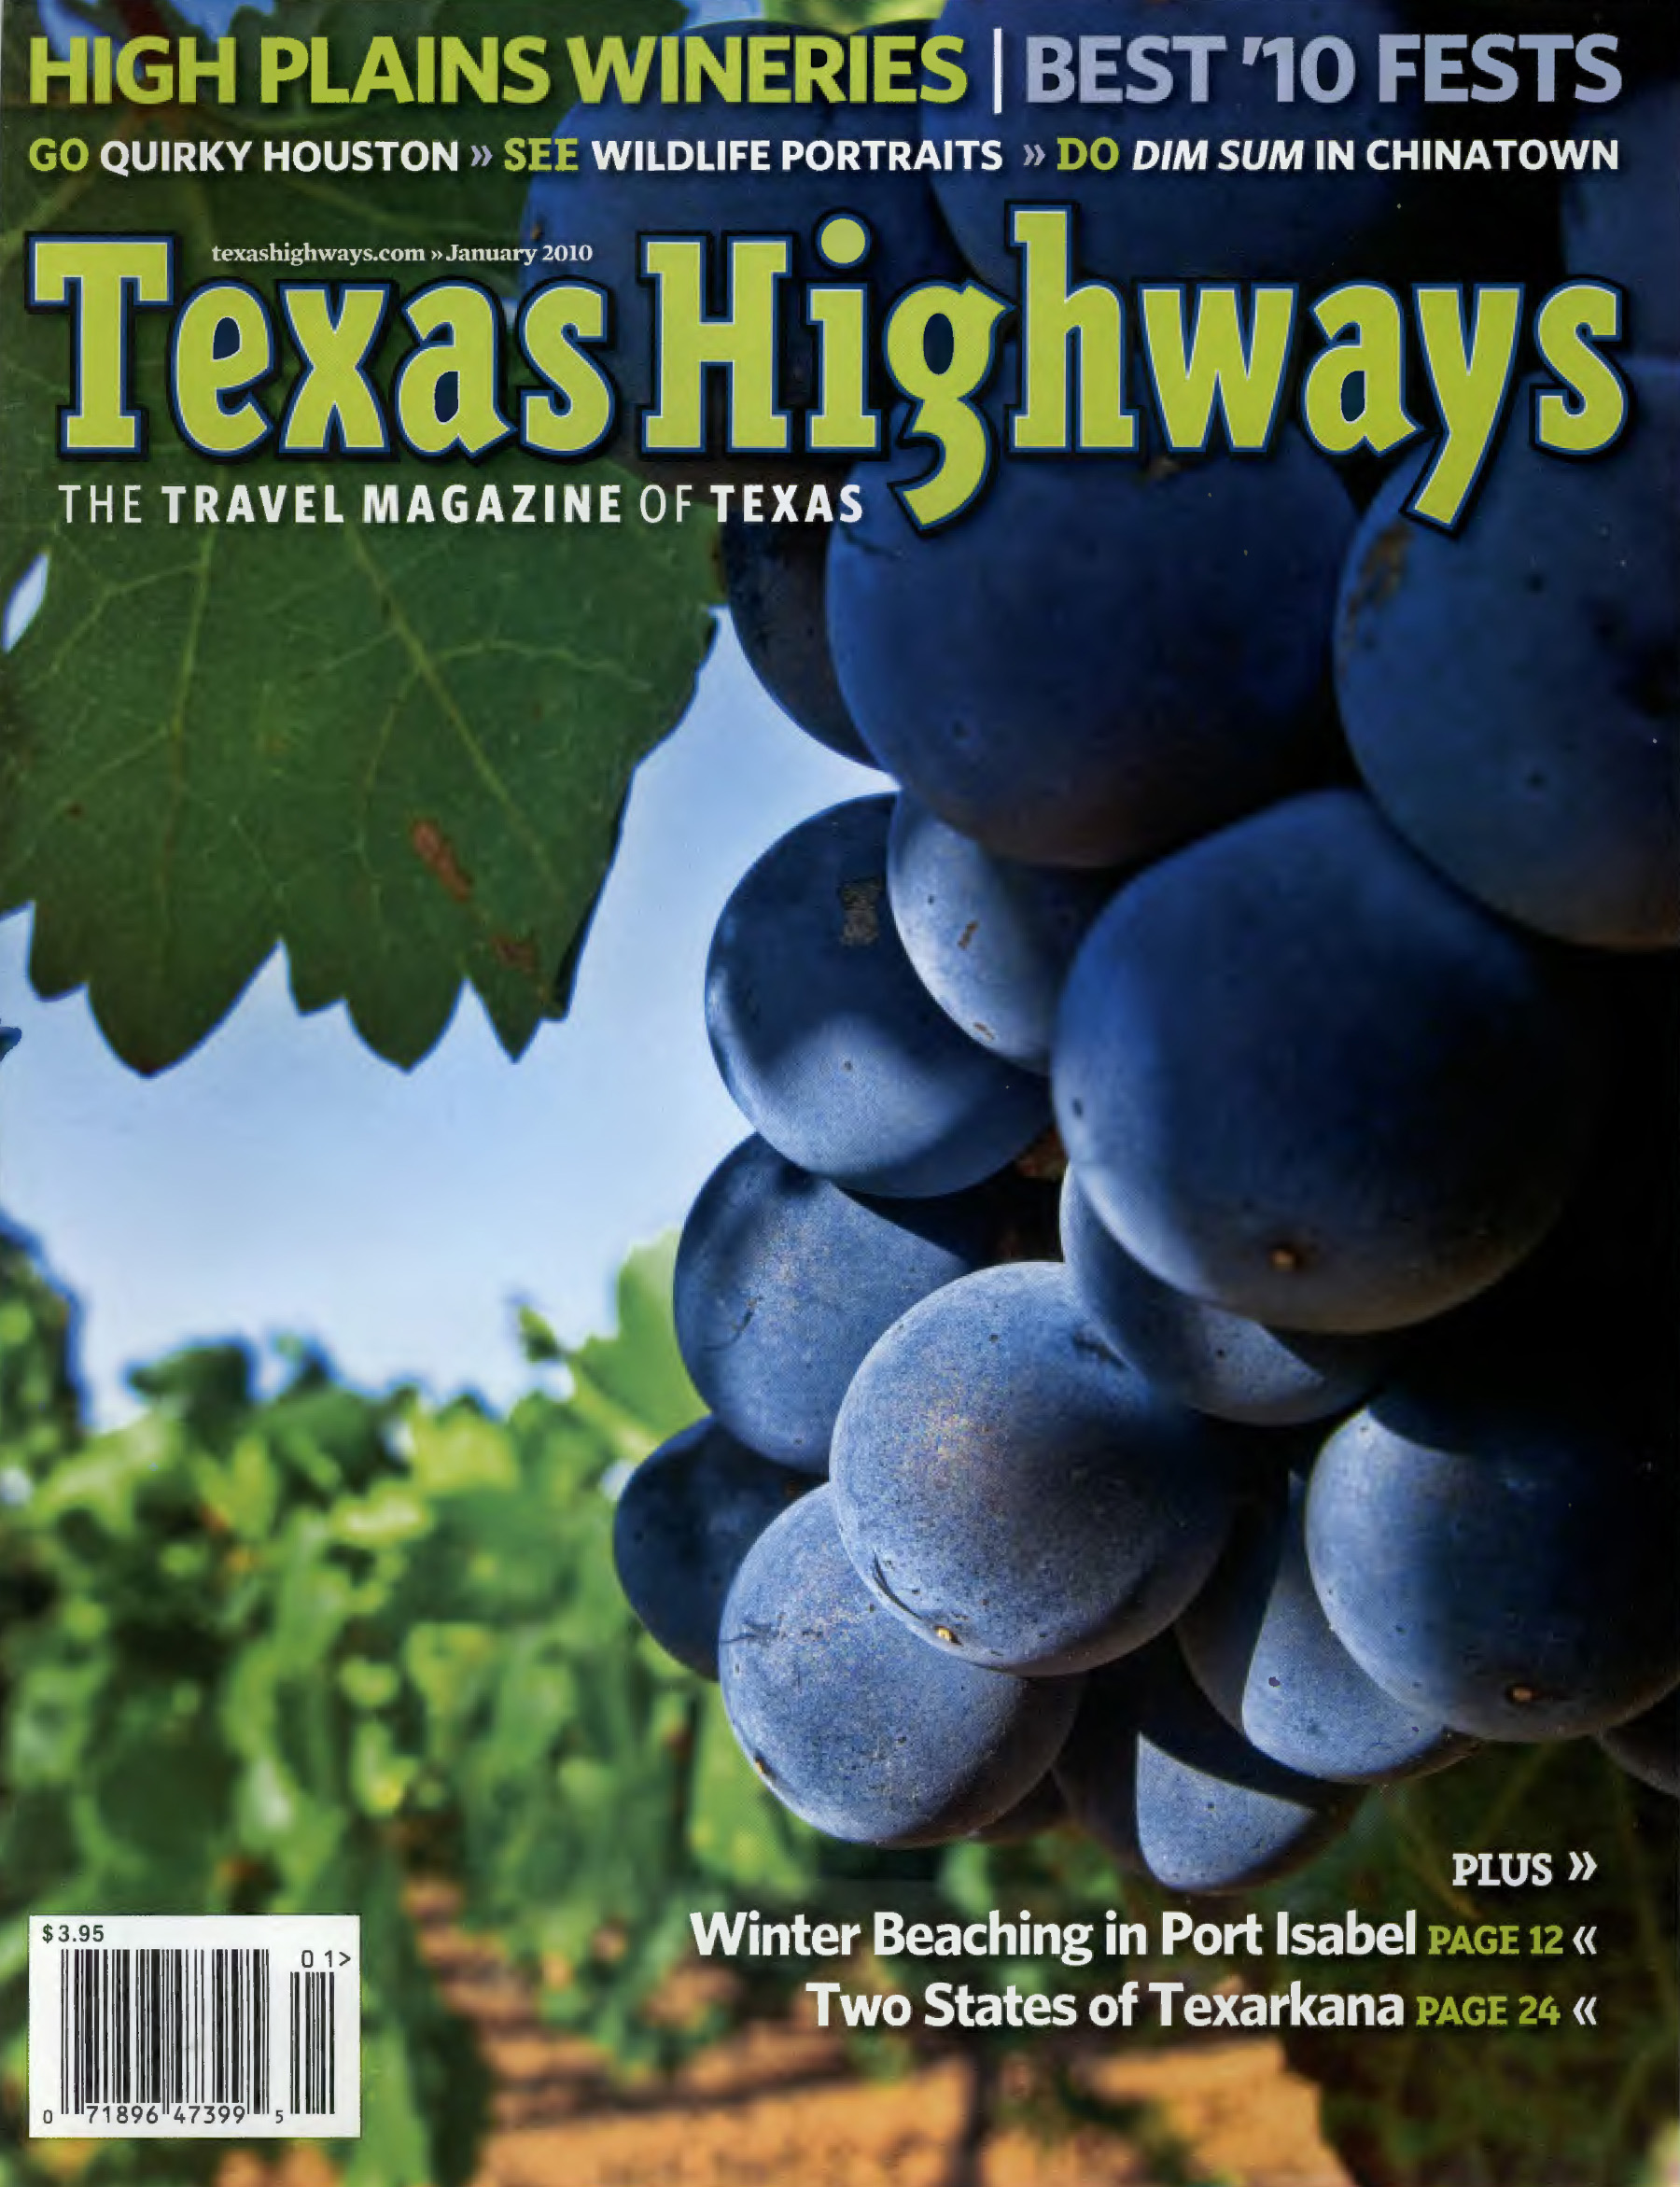 The January 2010 cover of Texas Highways Magazine